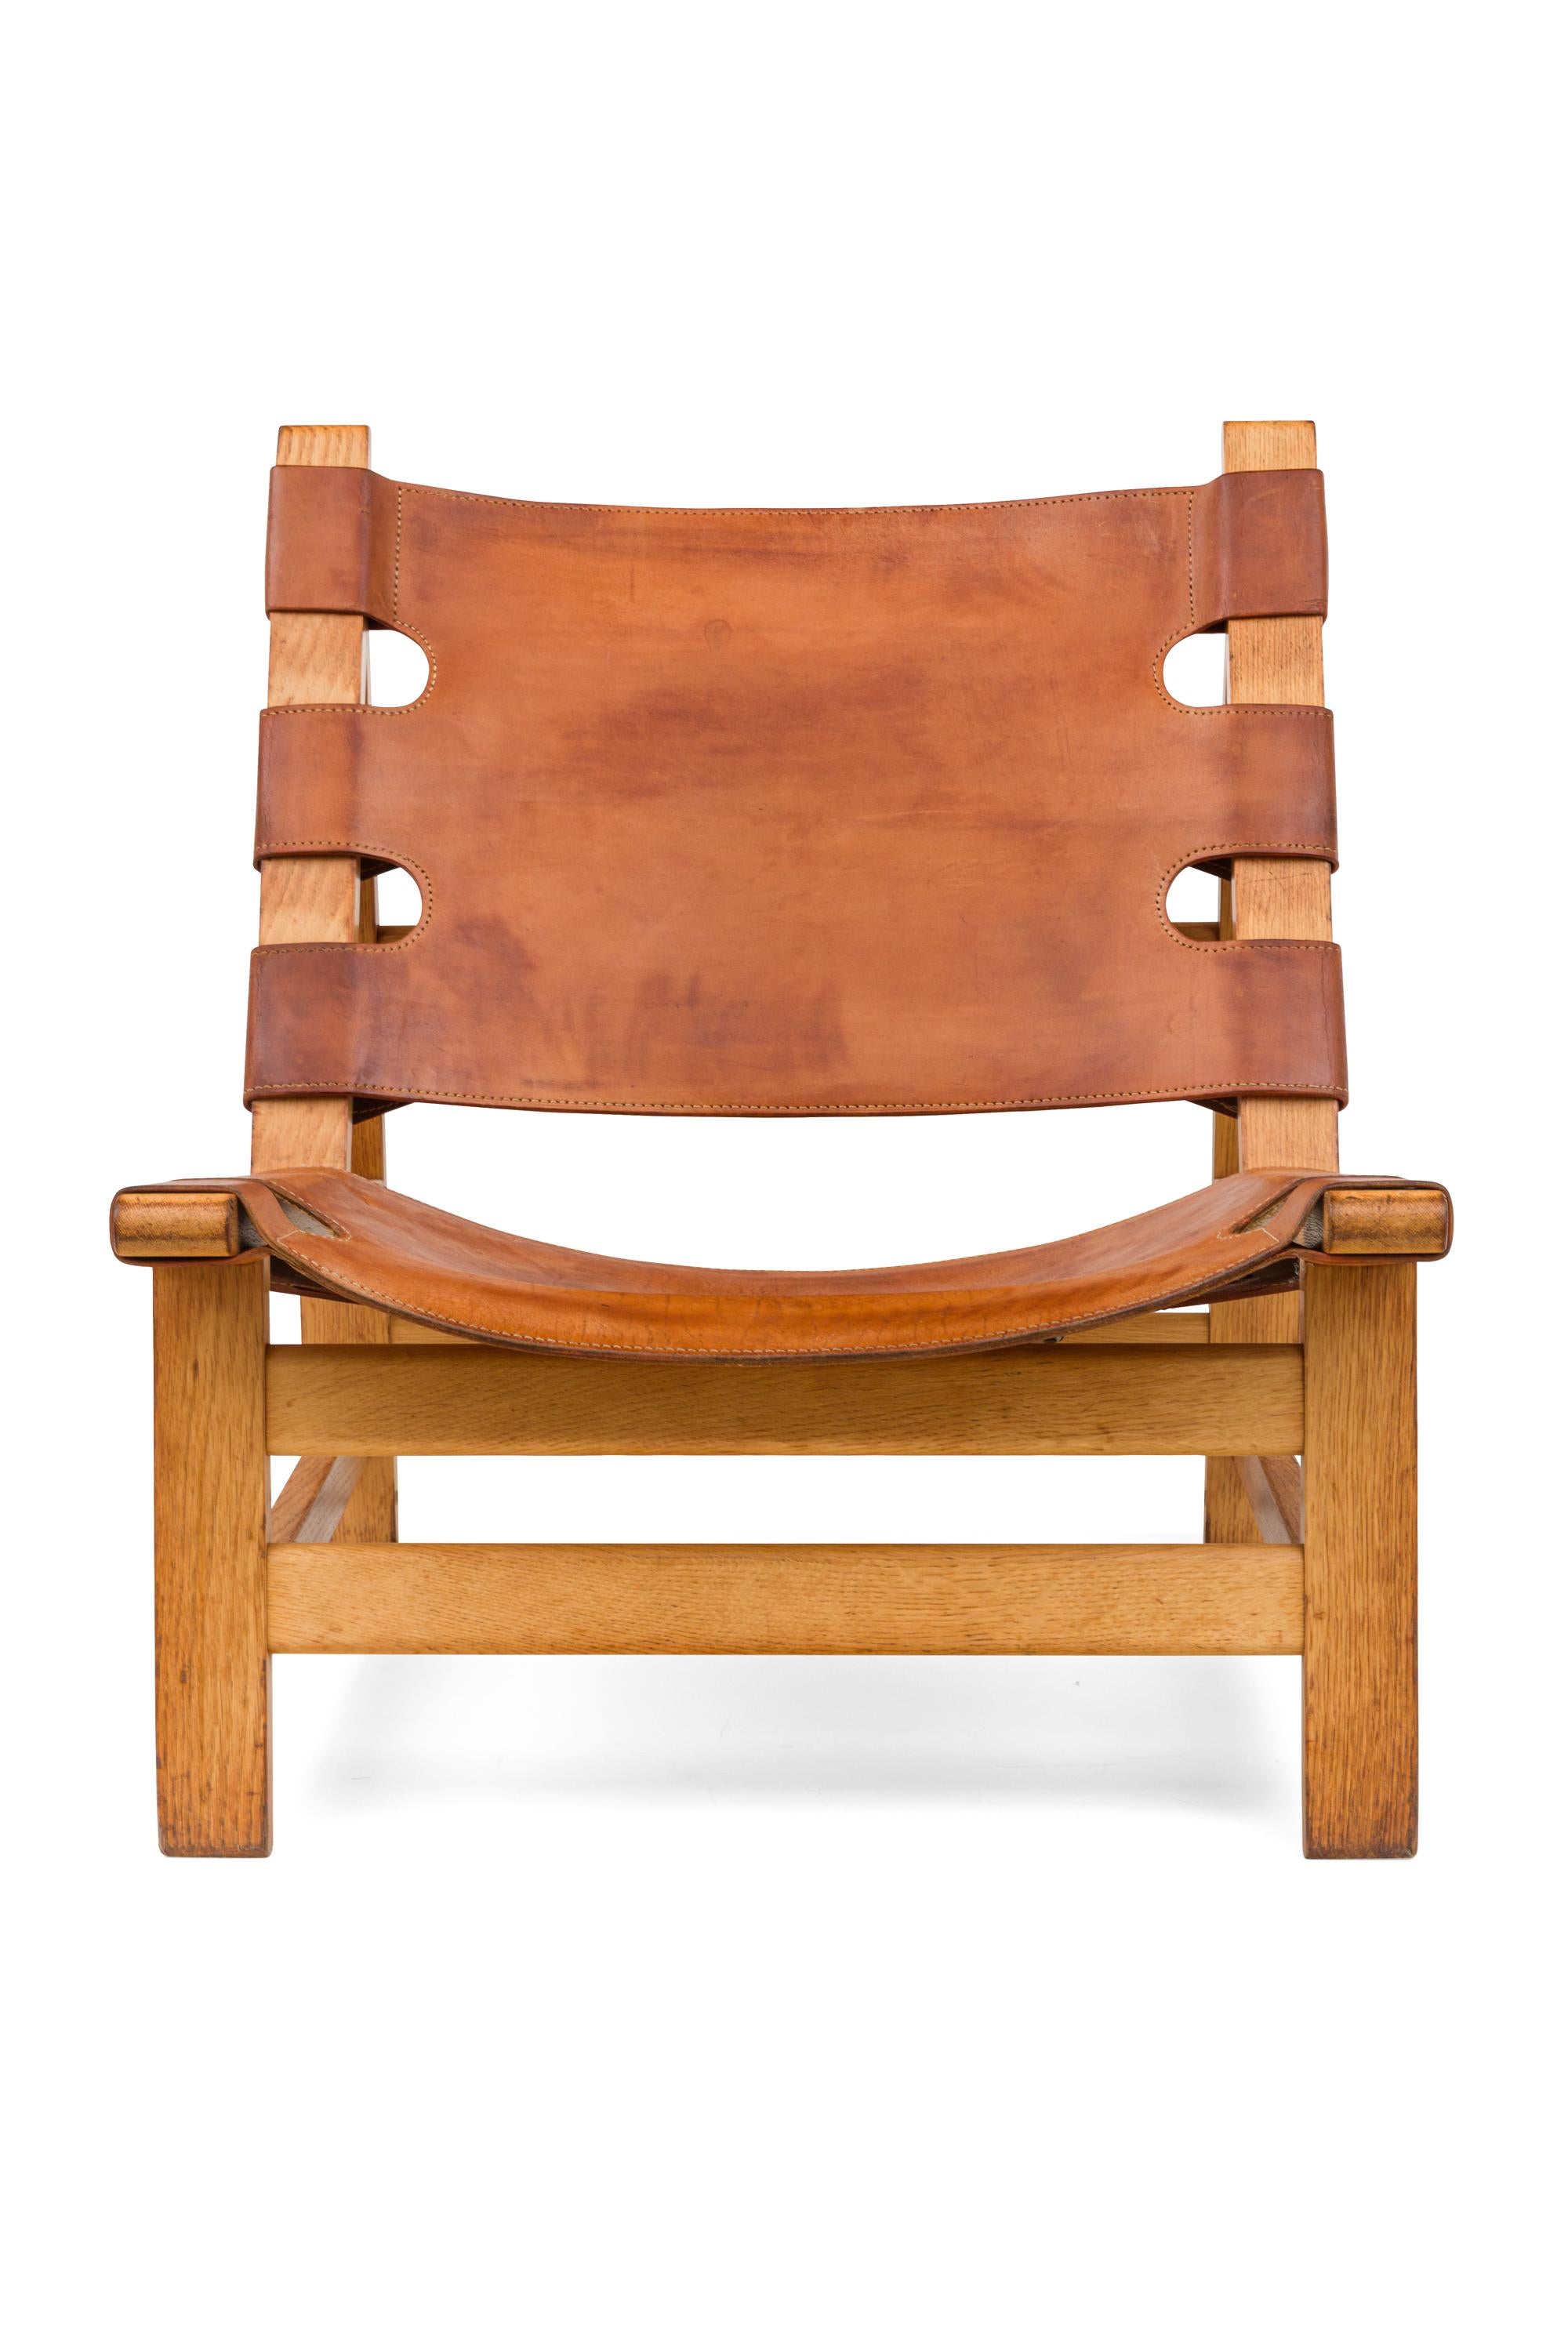 Børge Mogensen Oak and Leather Lounge Chairs, Denmark, 1960s In Good Condition For Sale In New York, NY